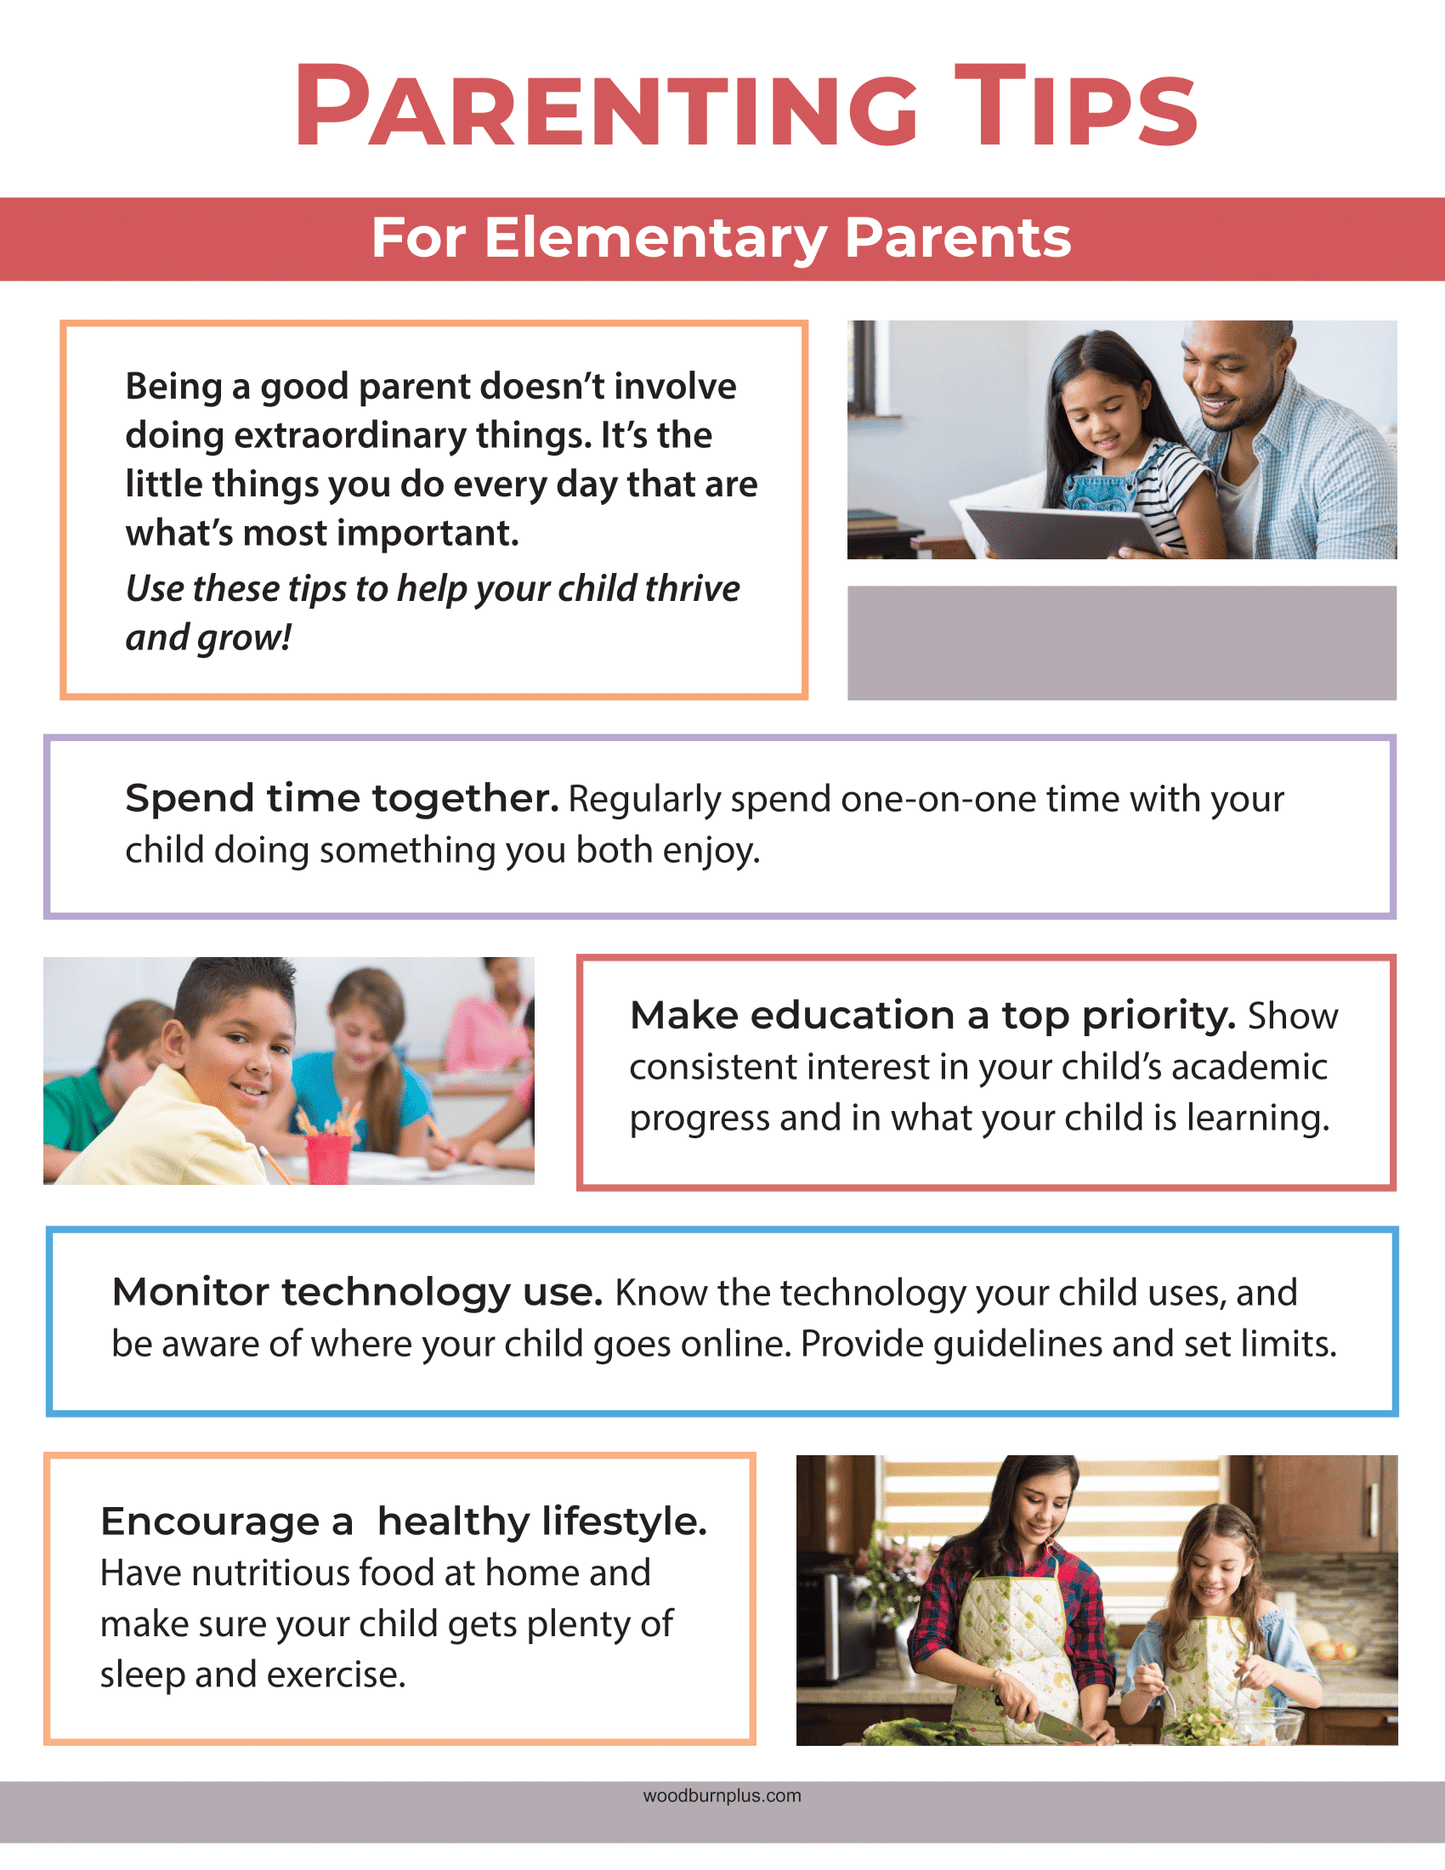 Parent Tips for Elementary Parents